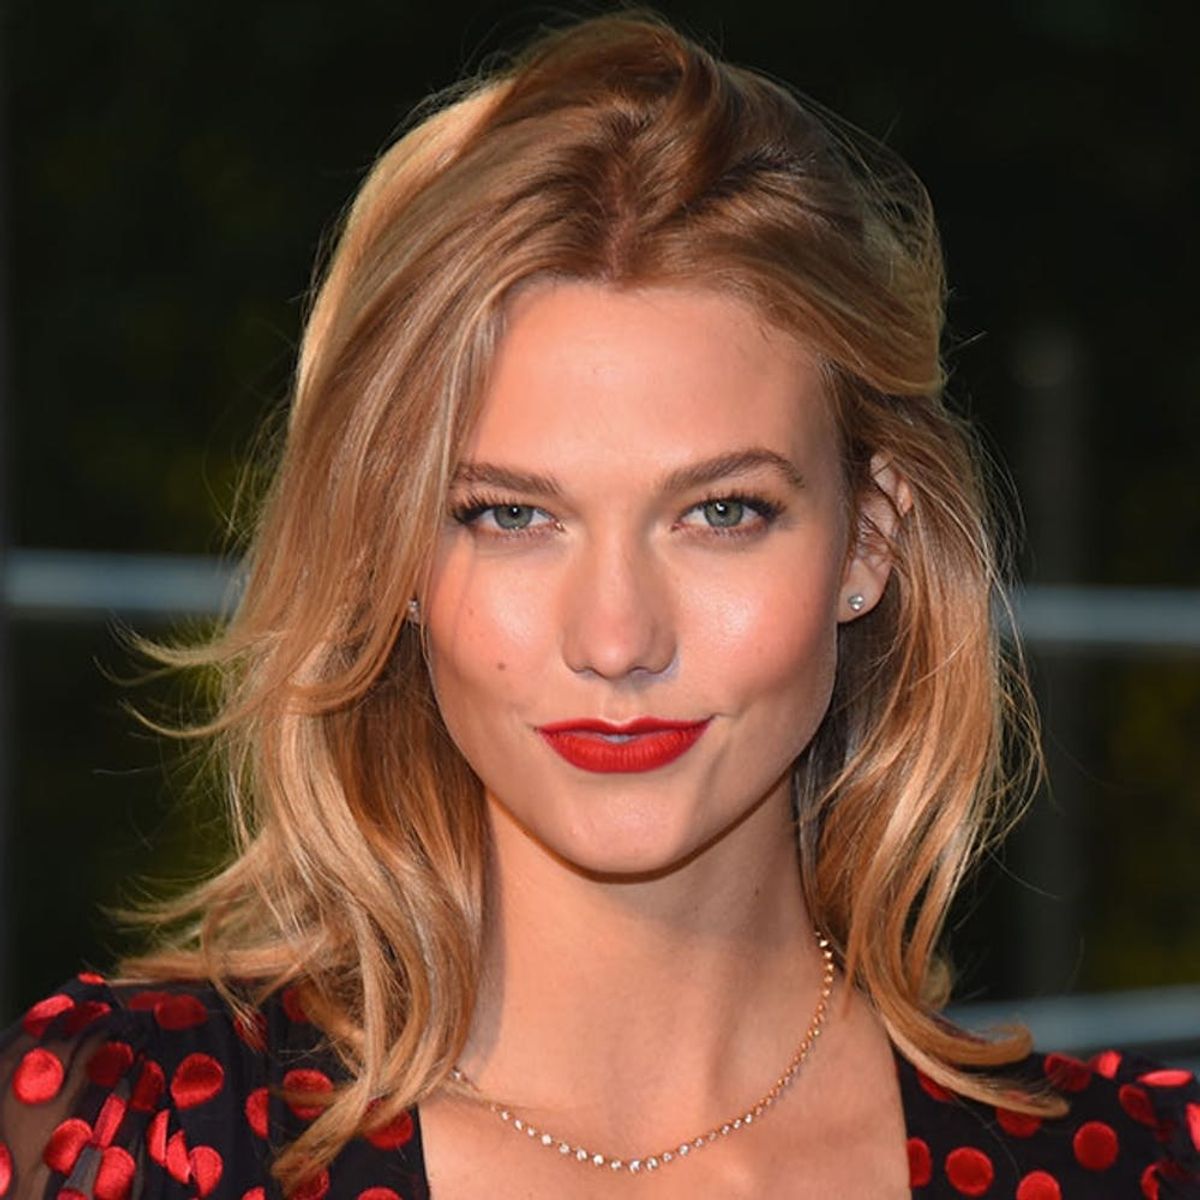 8 Beauty Secrets Karlie, Gigi and Other Top Models Swear By